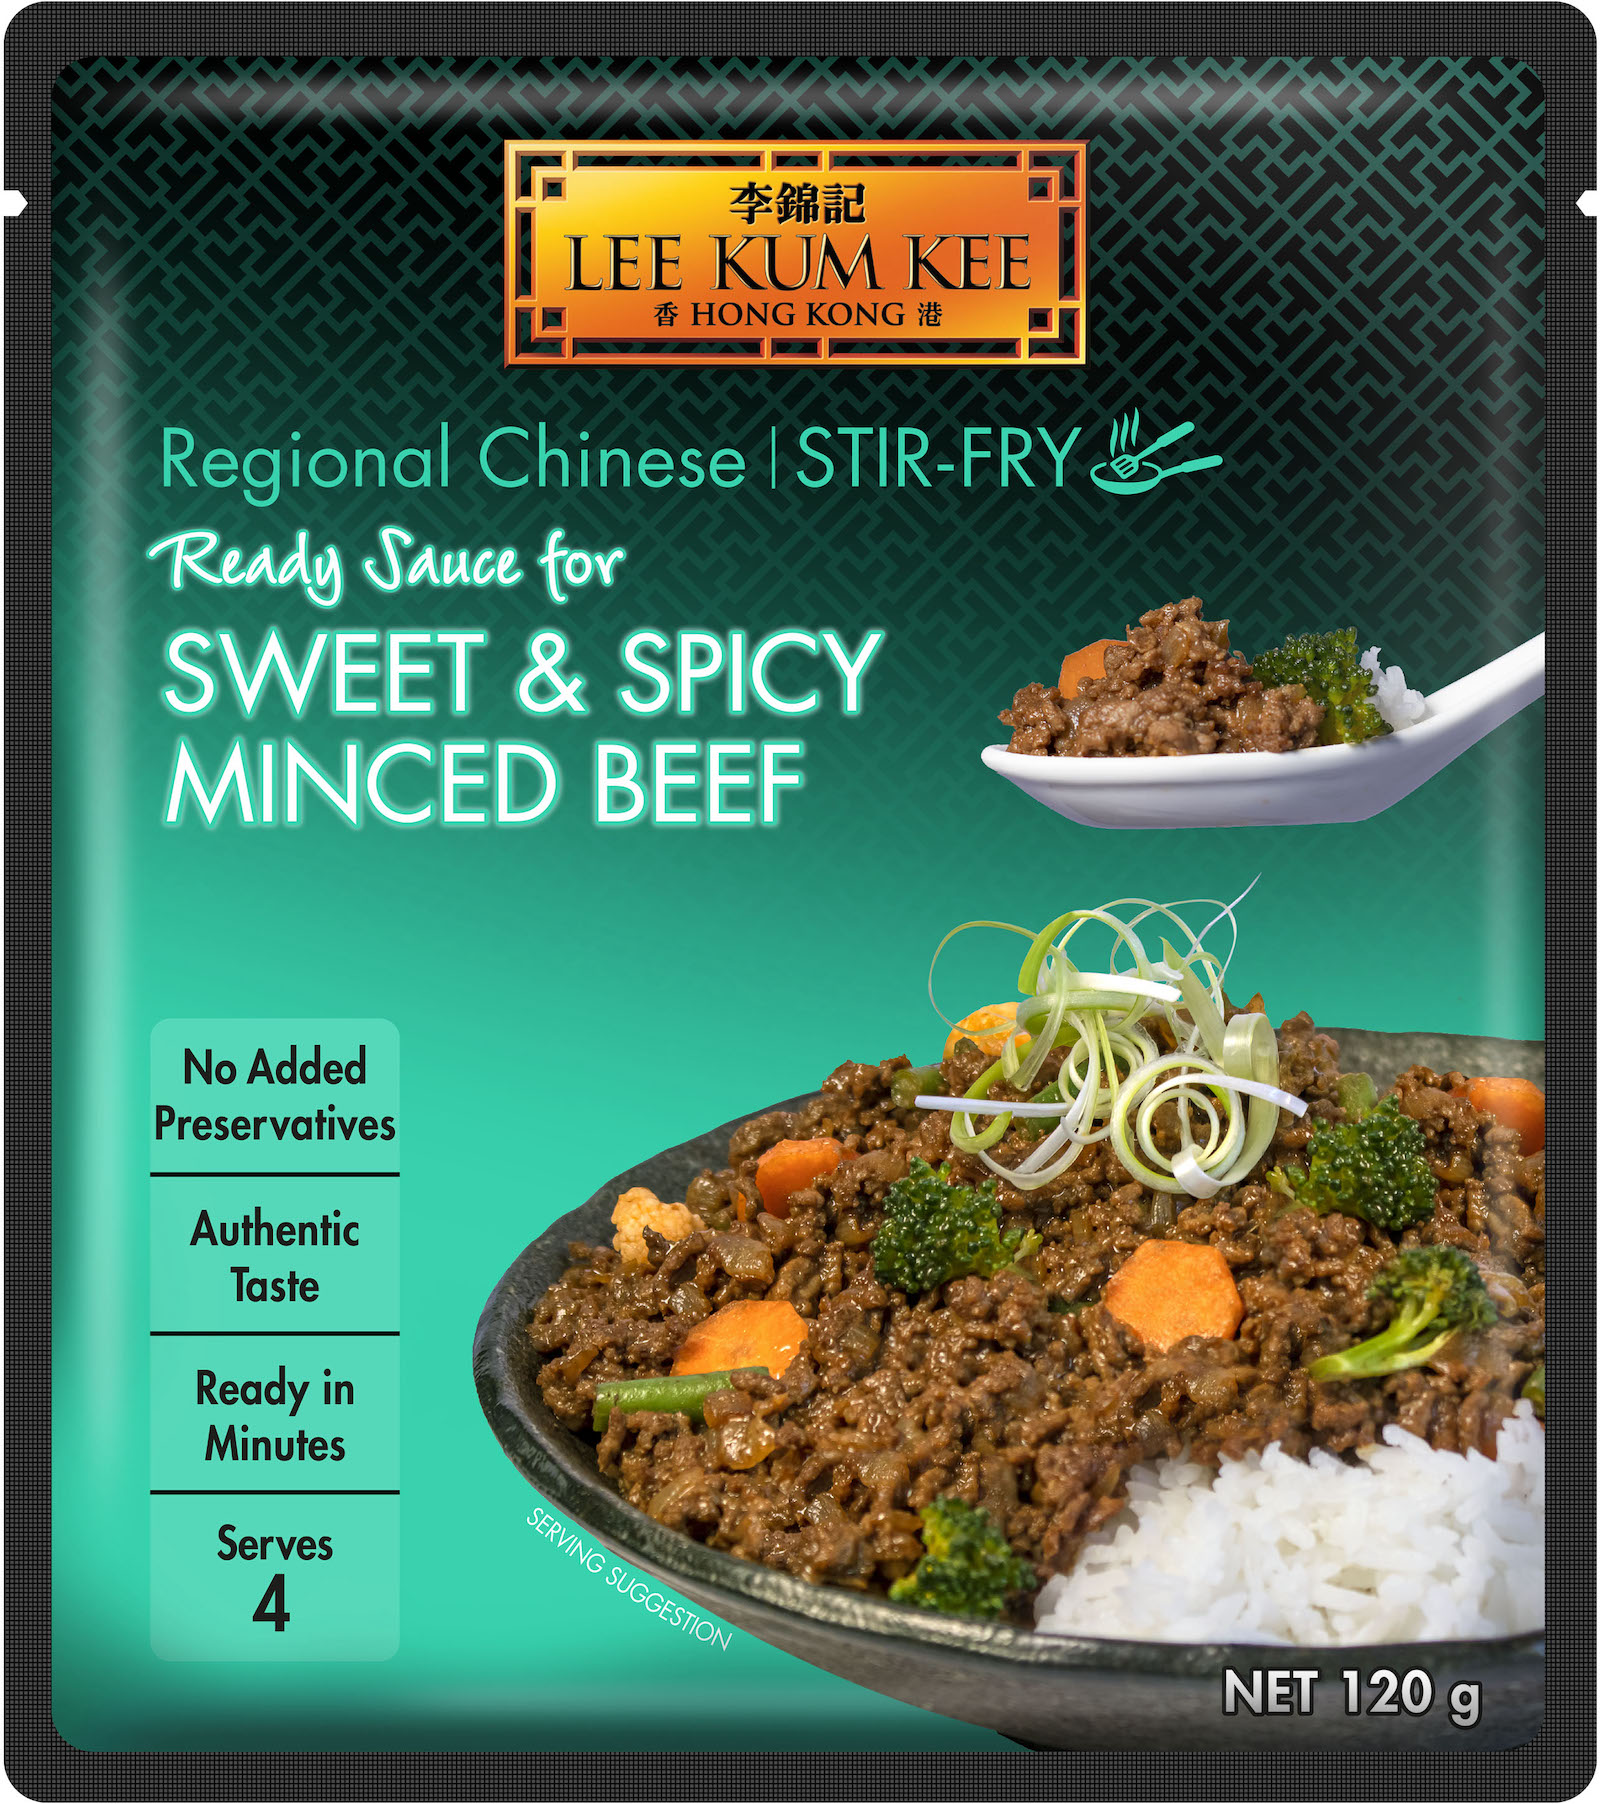 June Must-Haves 2023 - package of Lee Kum Kee regional Chinese stir-fry ready sauce for sweet and spicy minced beef